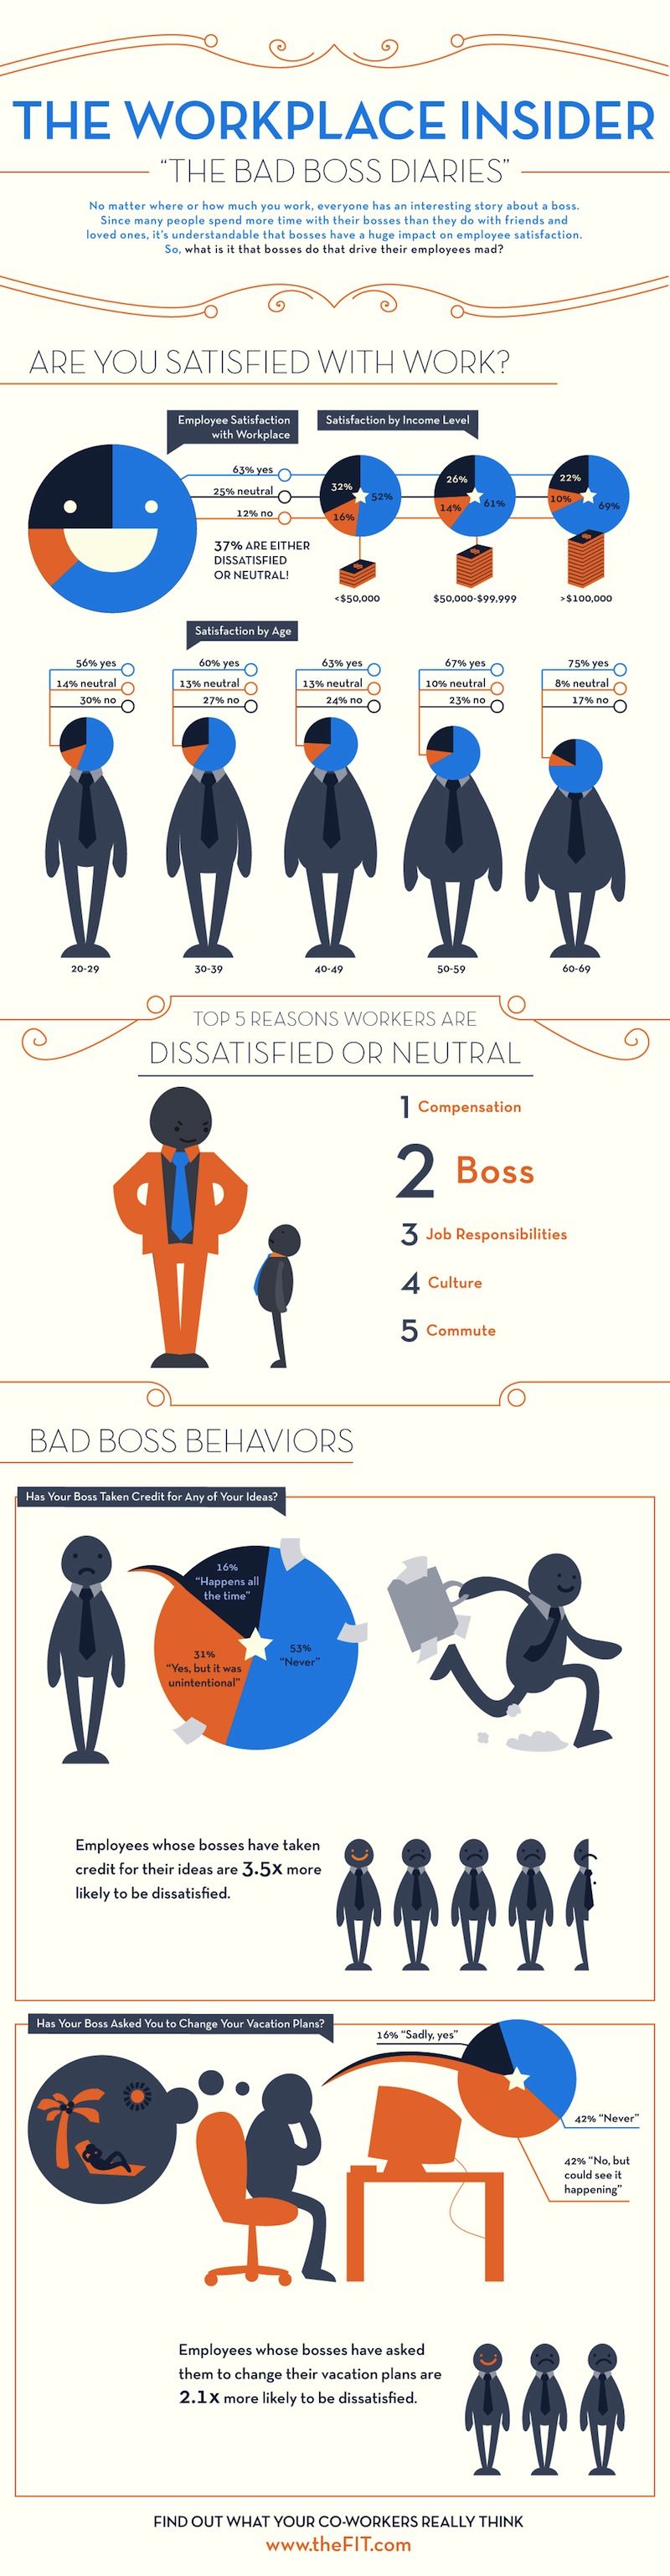 Why People Hate Their Jobs [INFOGRAPHIC]